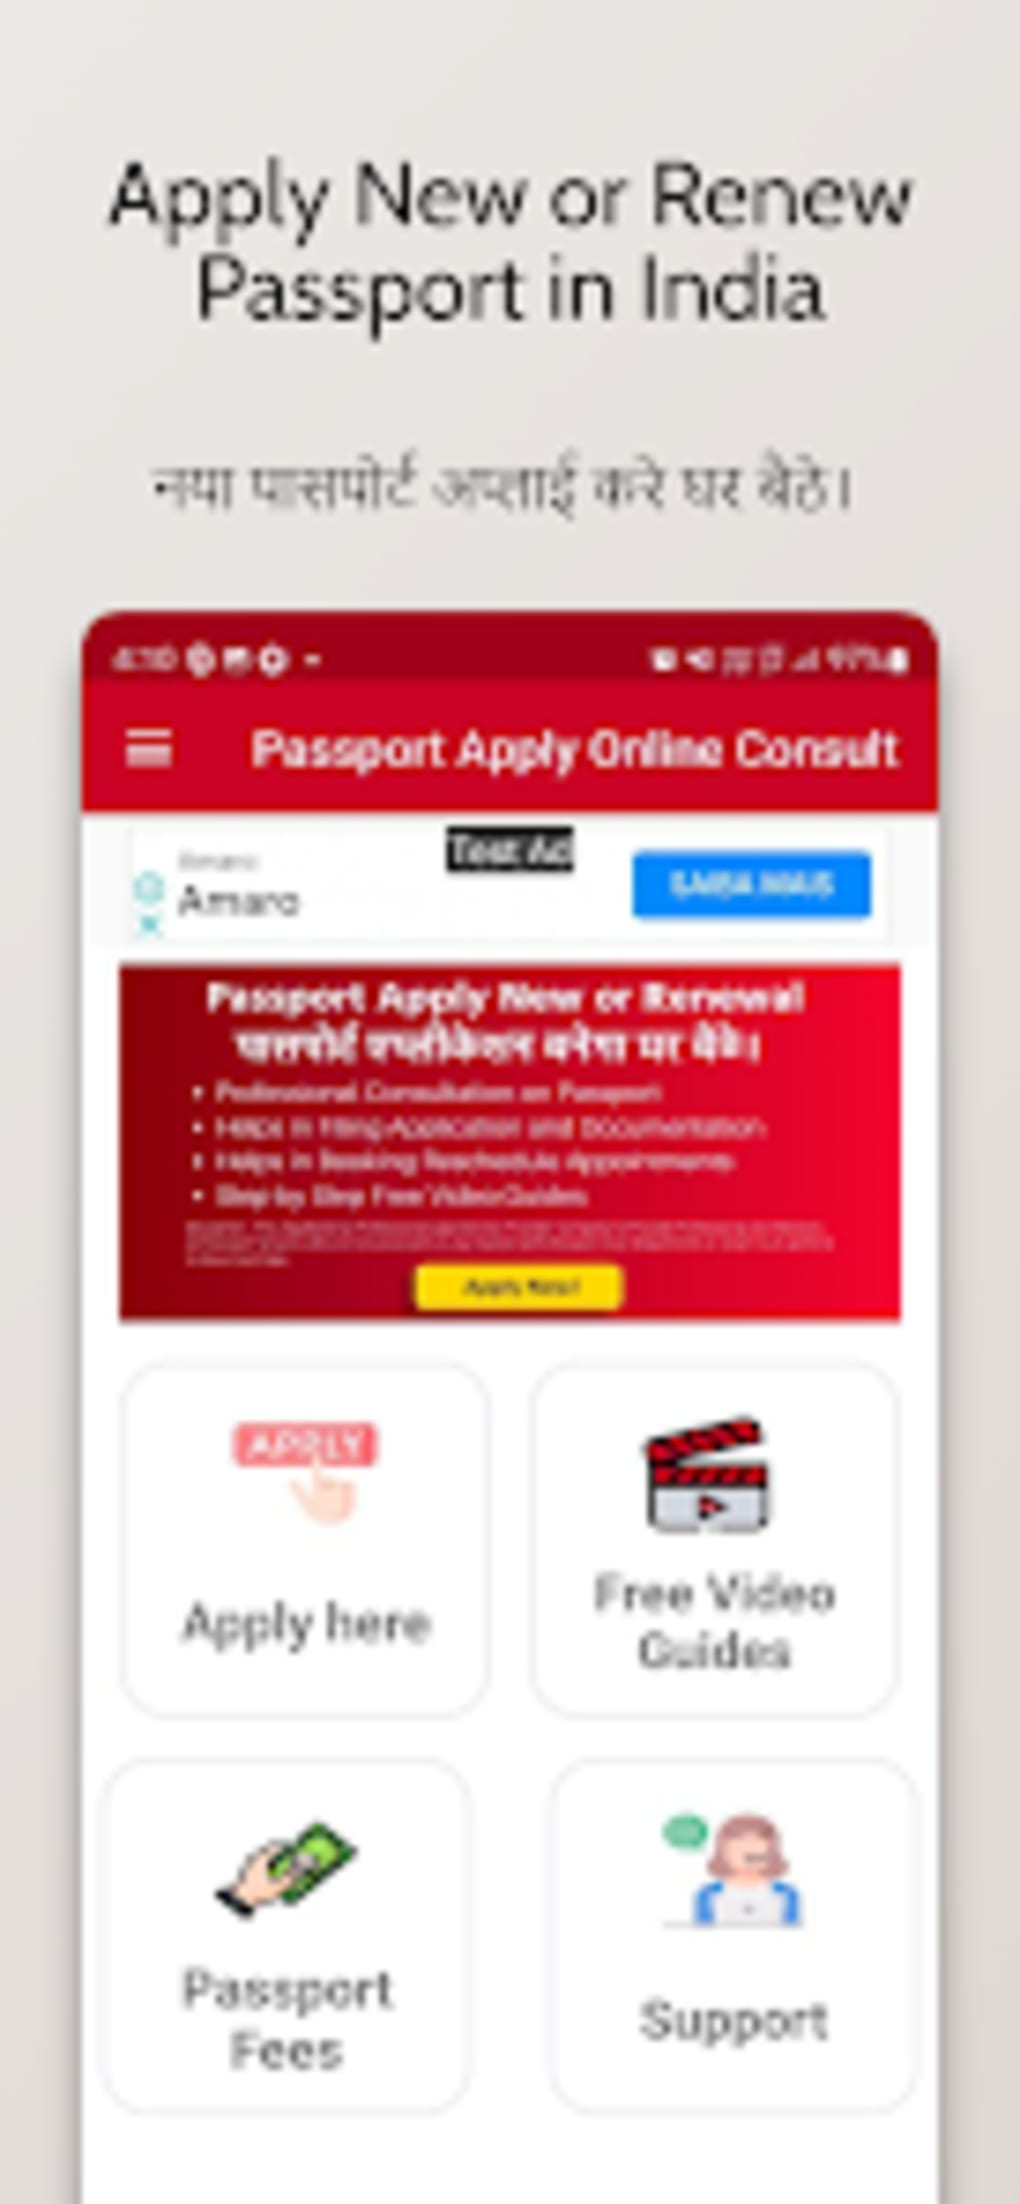 passport-apply-online-consult-android